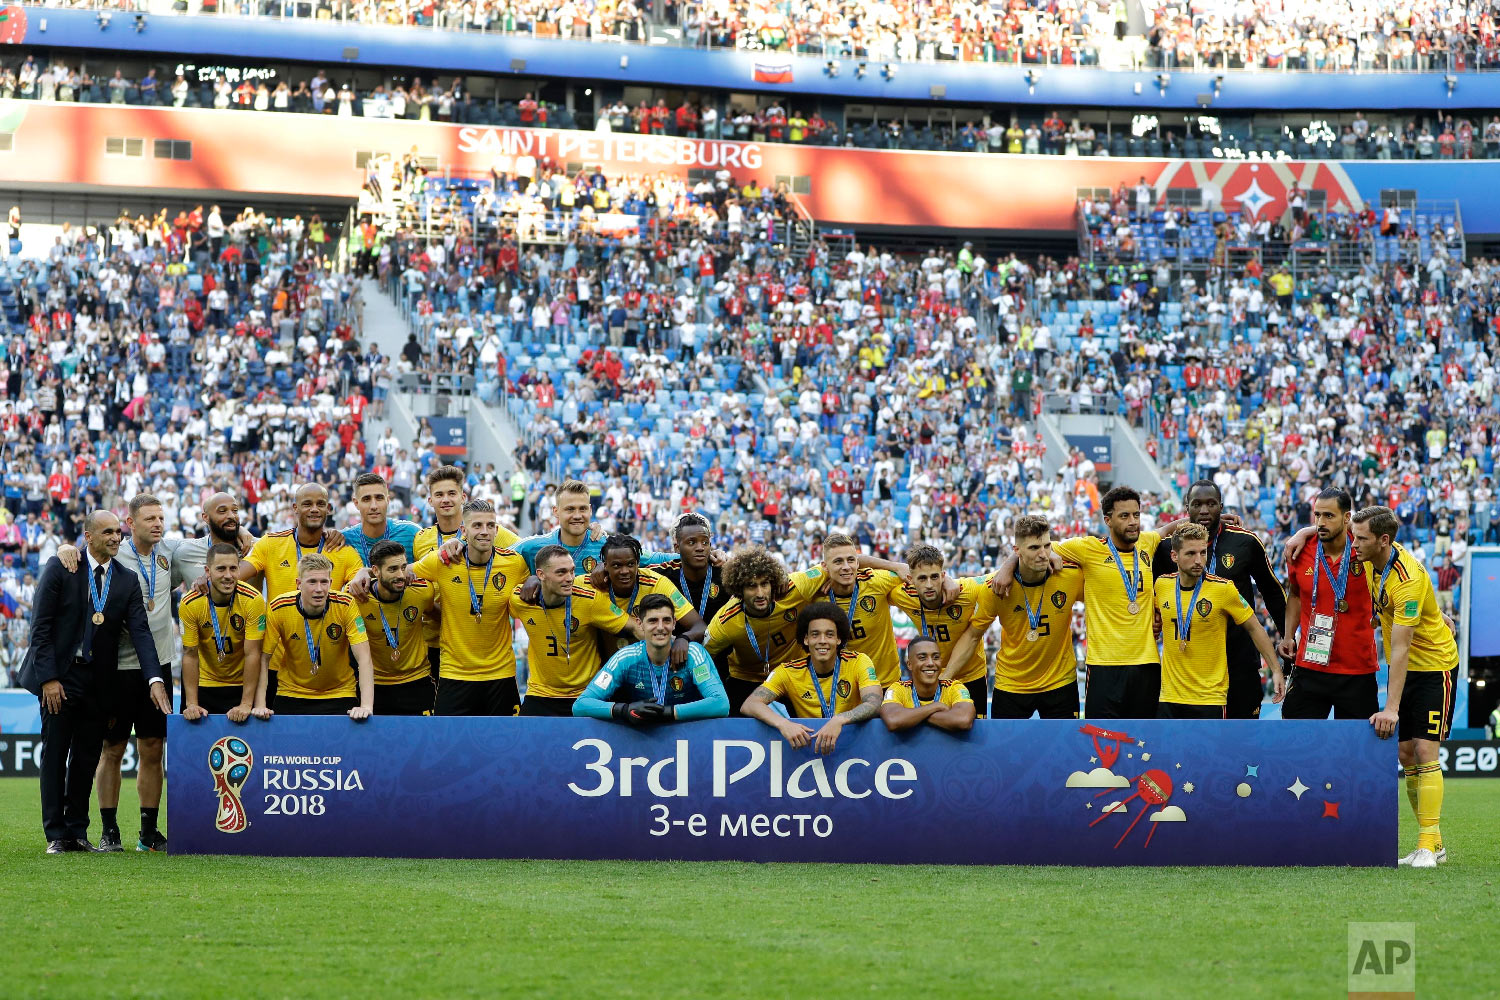  Team Belgium pose after the third place match between England and Belgium at the 2018 soccer World Cup in the St. Petersburg Stadium in St. Petersburg, Russia, Saturday, July 14, 2018. (AP Photo/Natacha Pisarenko) 